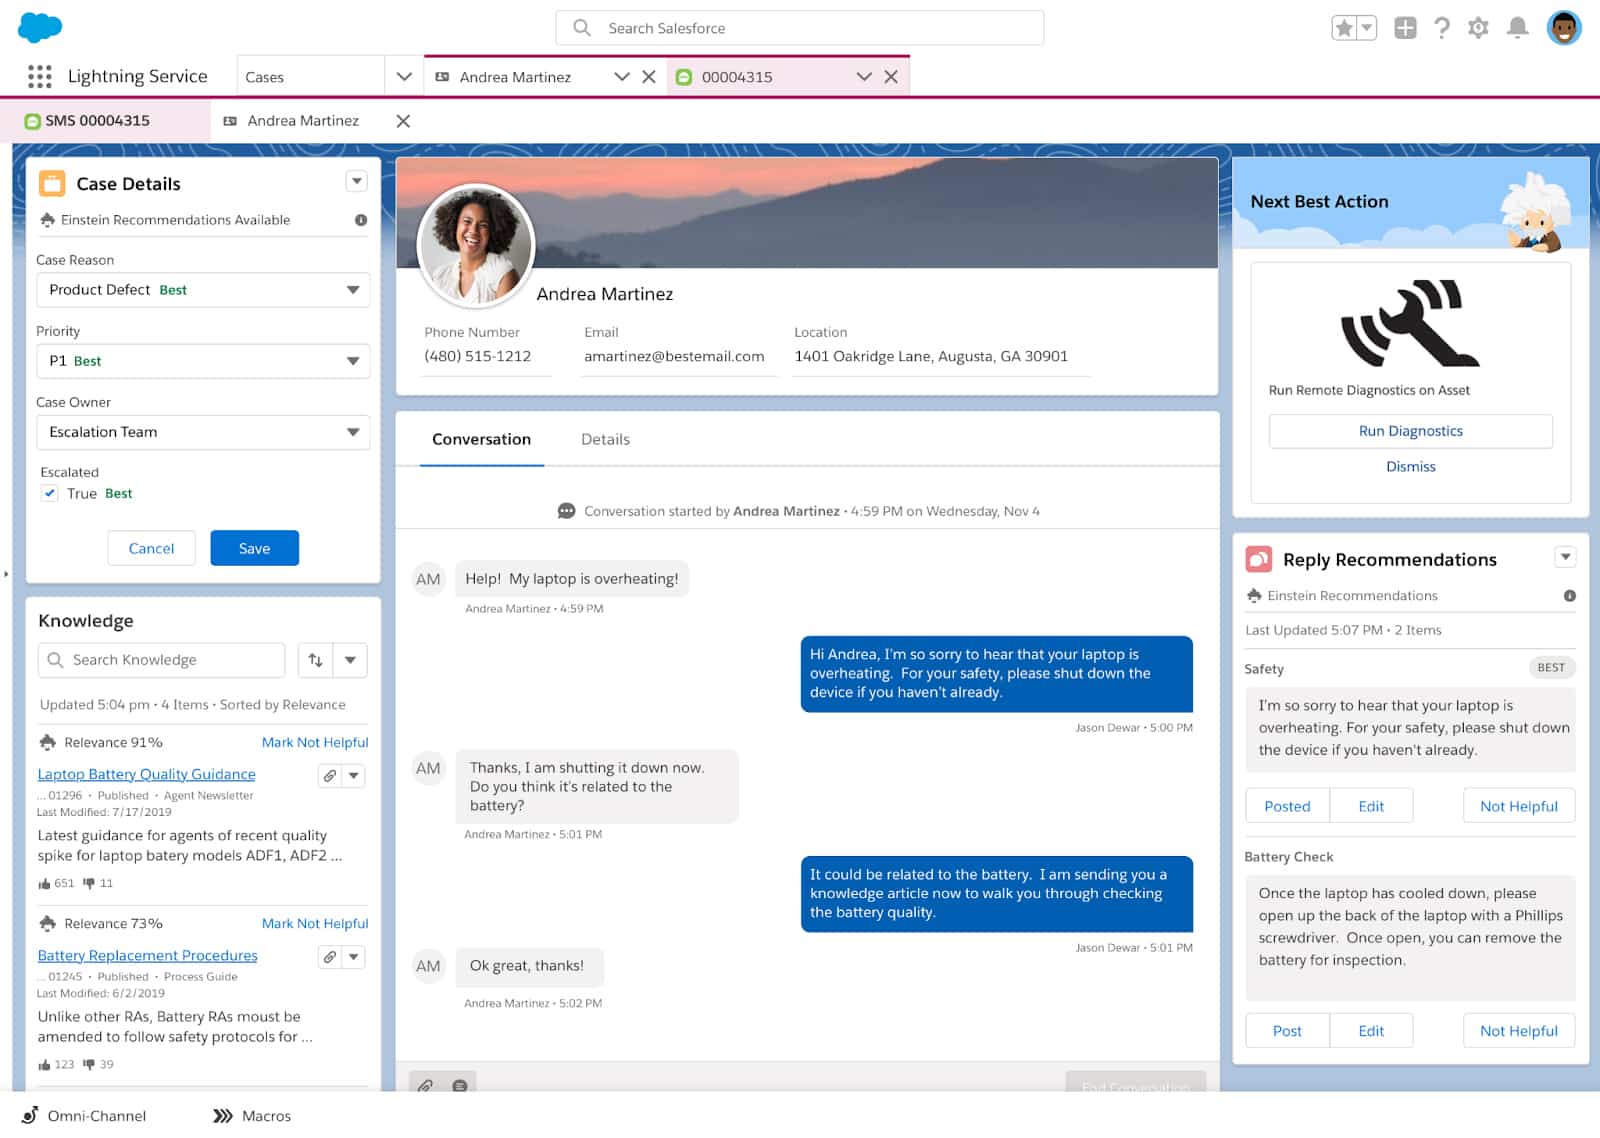 Andrea Martinez profile with sample conversation on Salesforce.